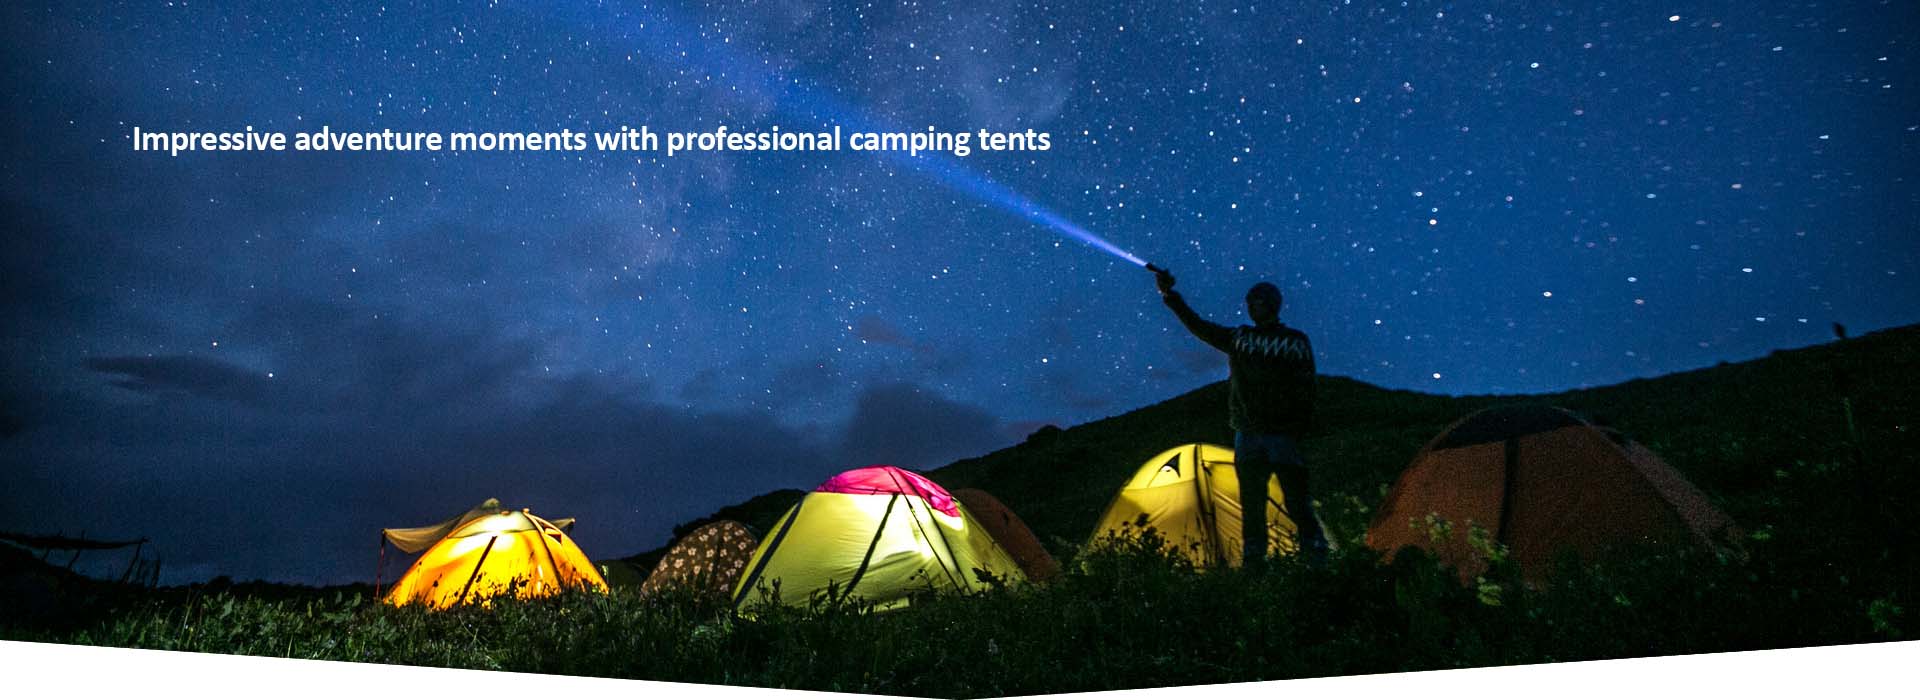 A wonderful night for you with professional camping tent